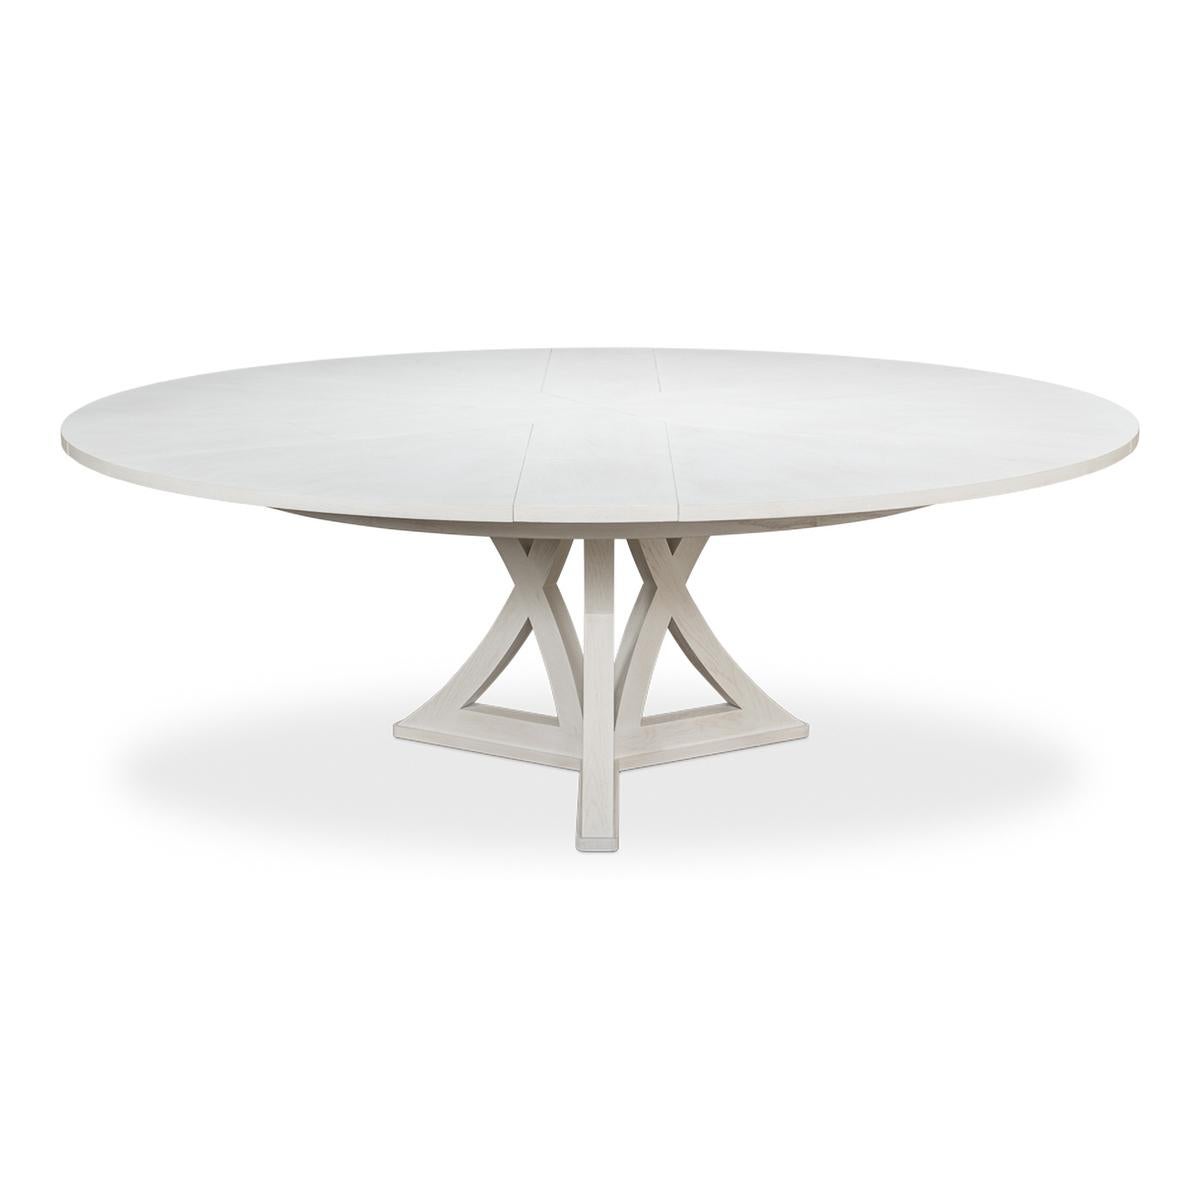 Wood Rustic Round Dining Table, Working White For Sale